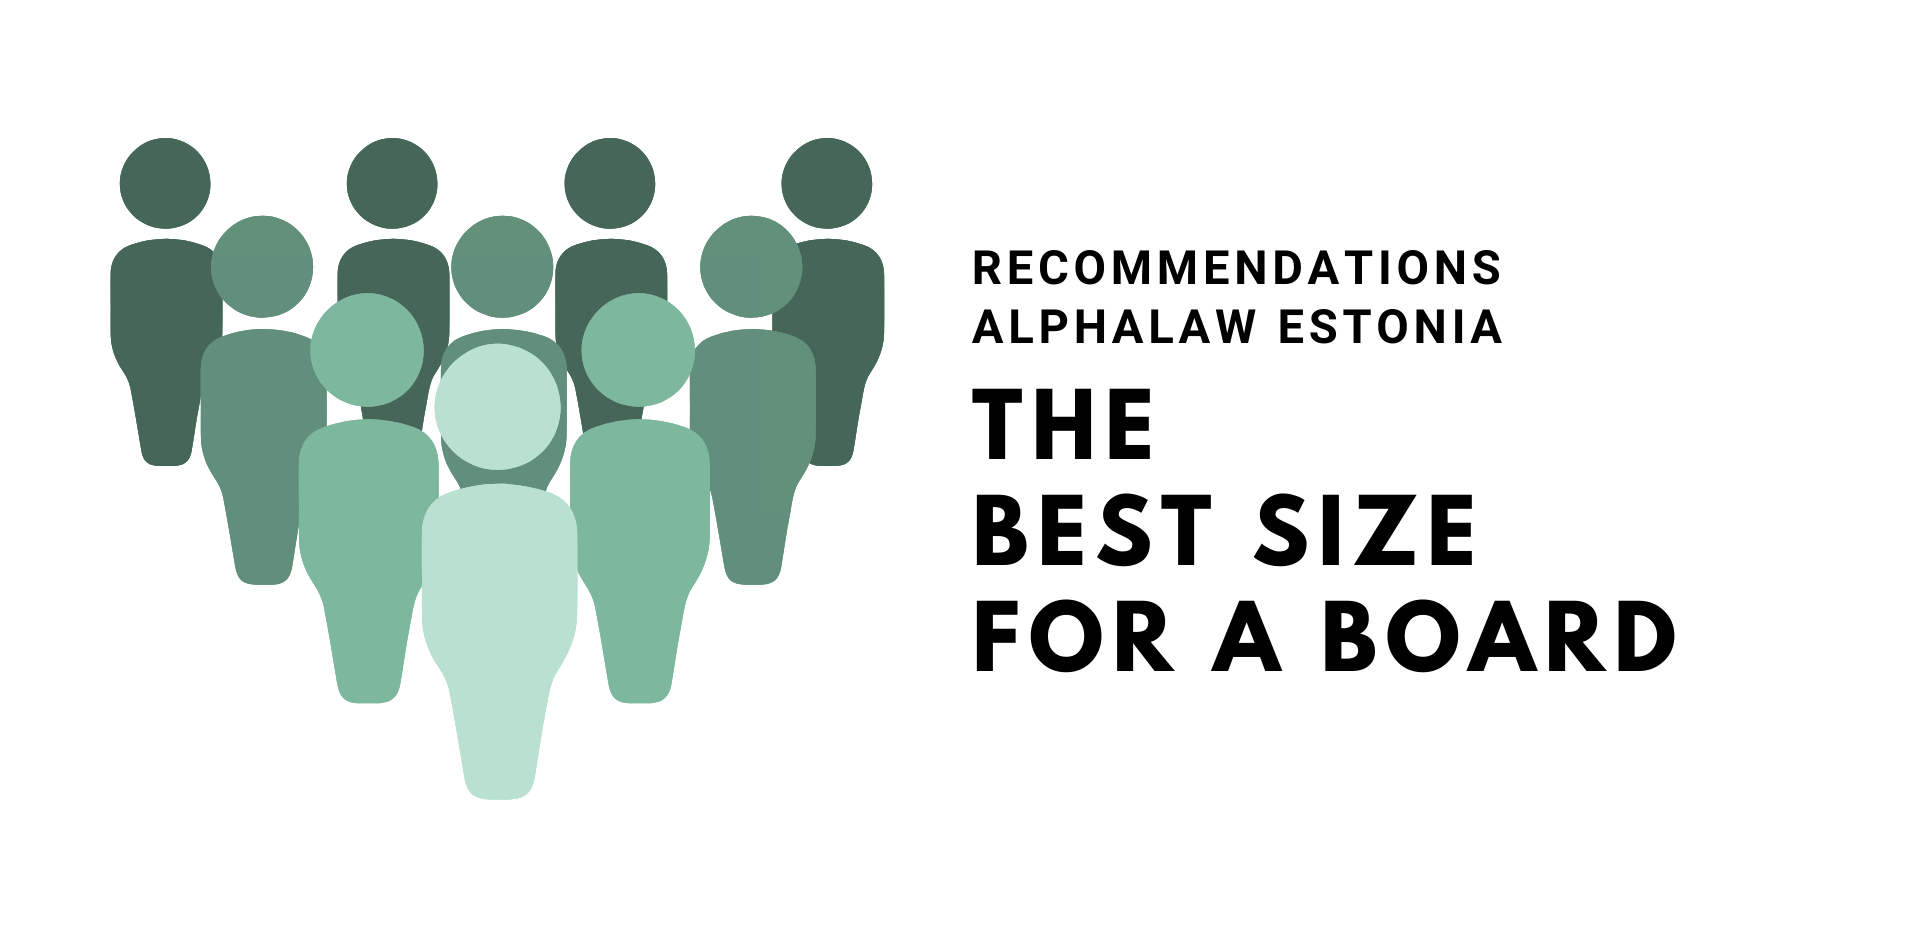 The Best Size for a Board